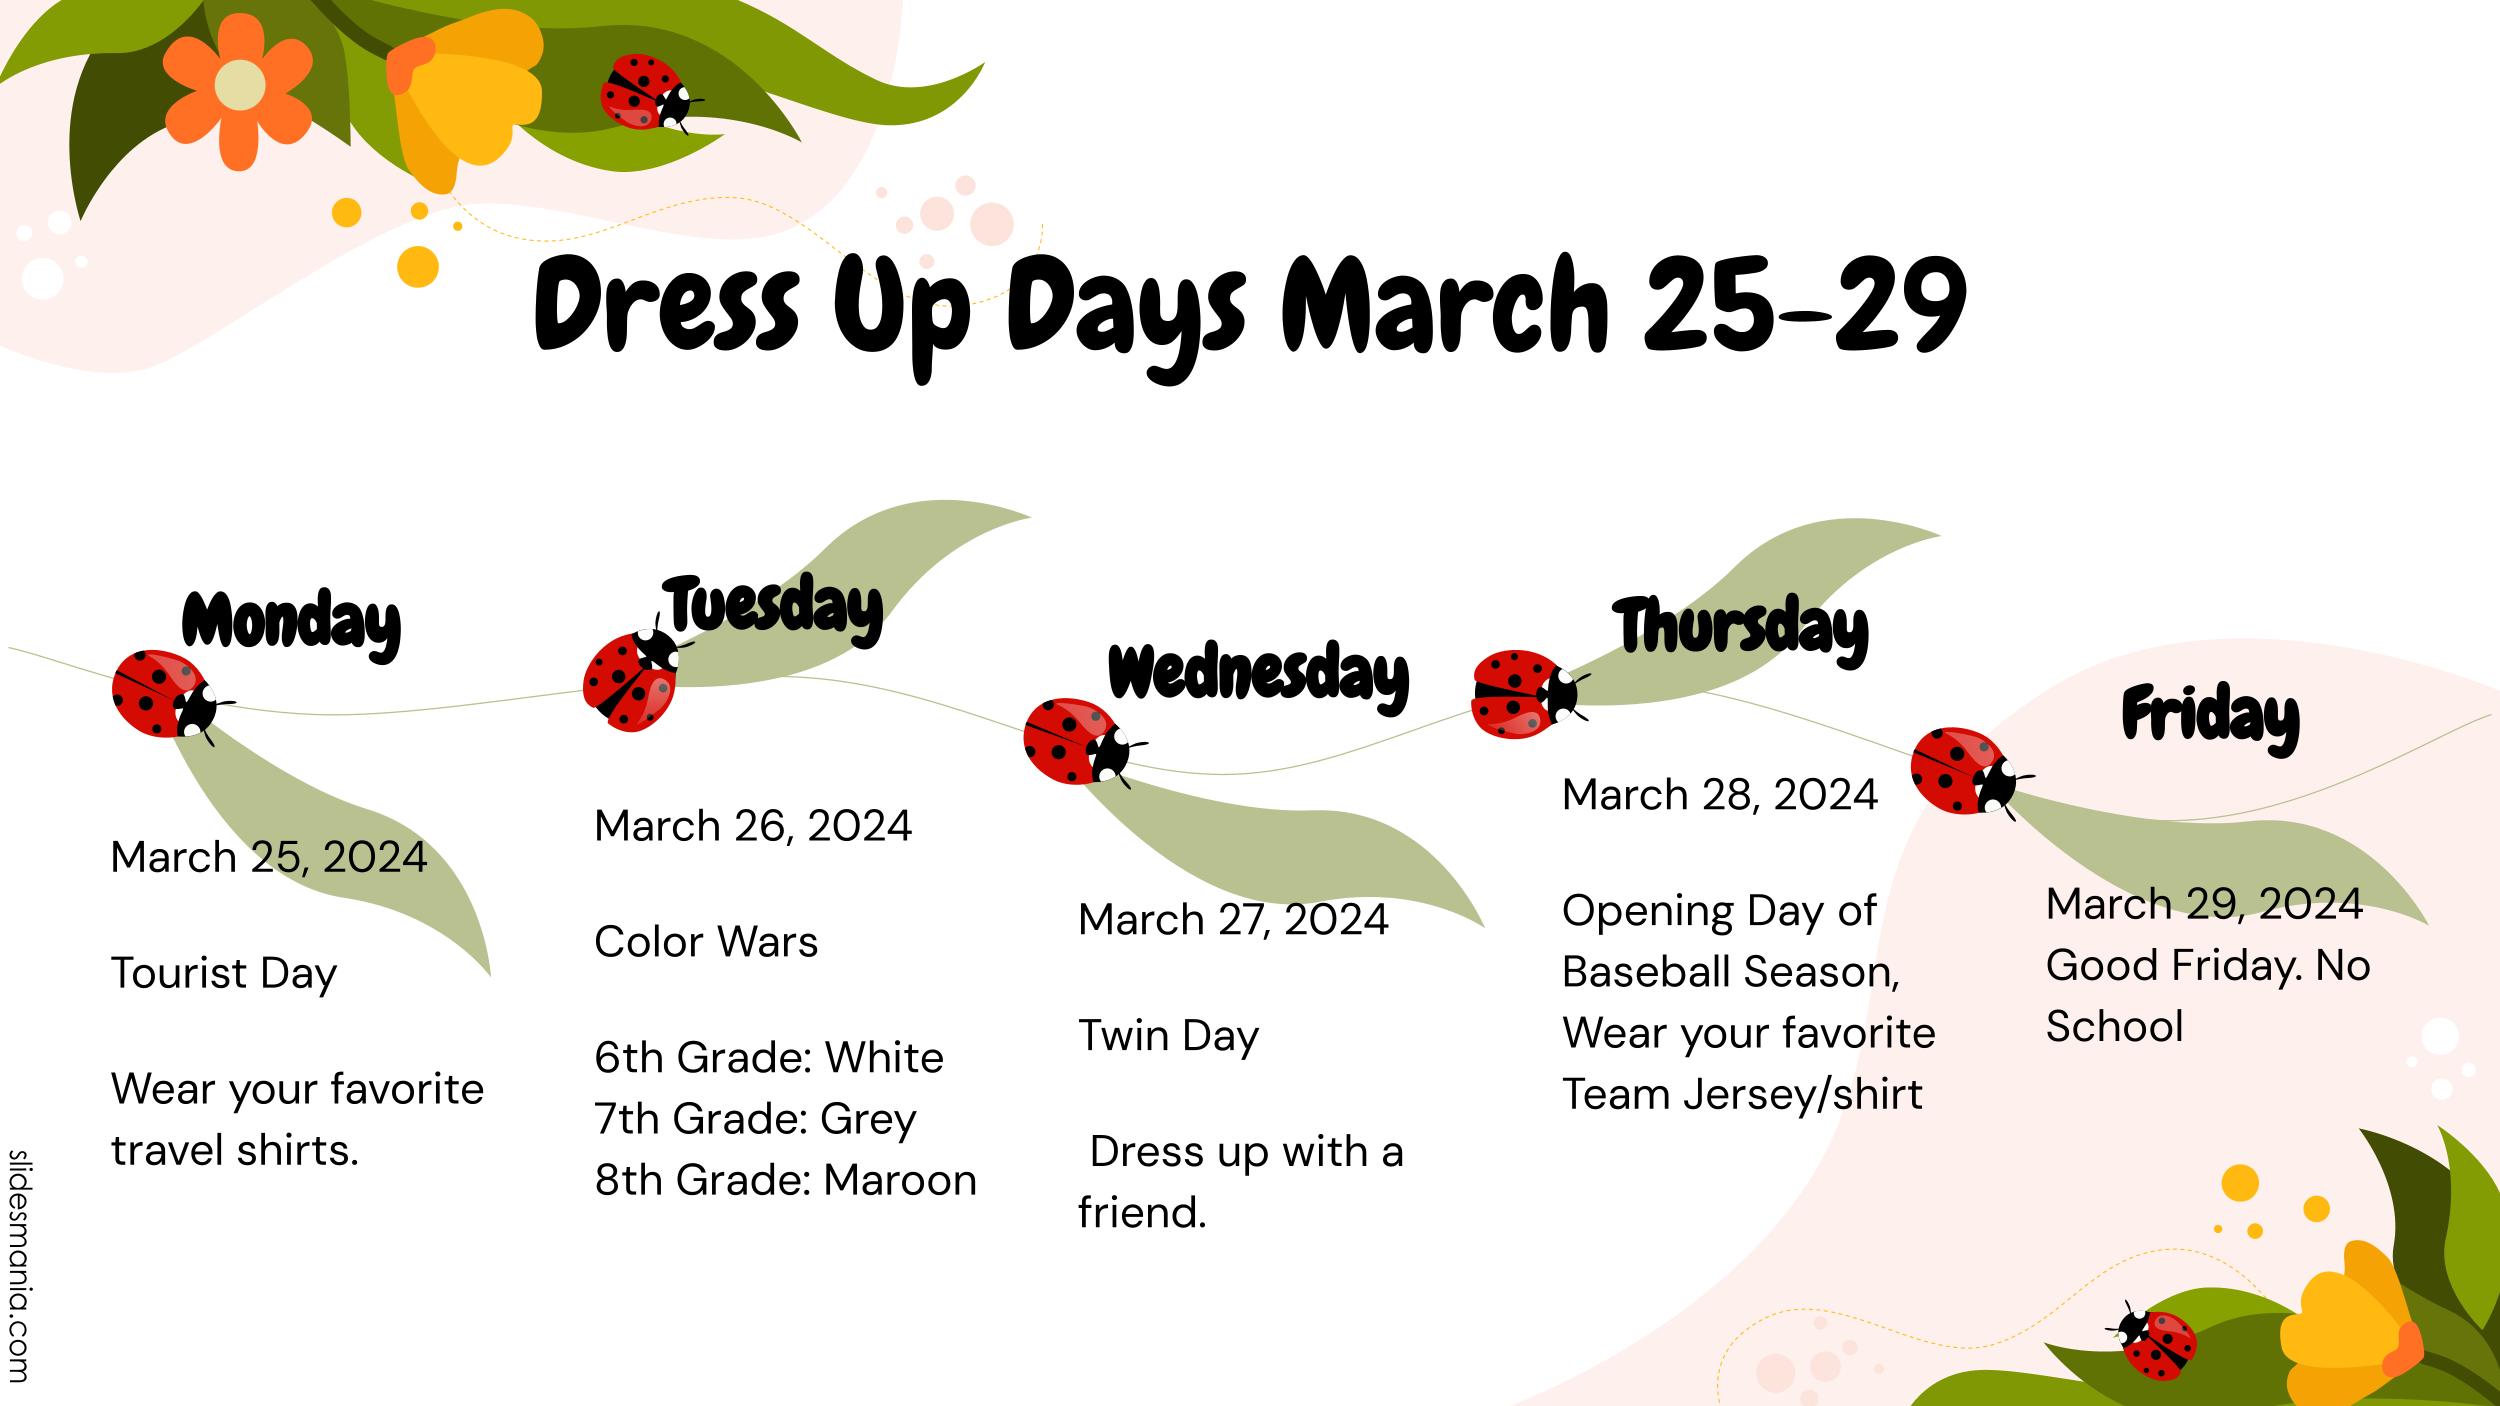 Dress up week schedule image see the table below for details.